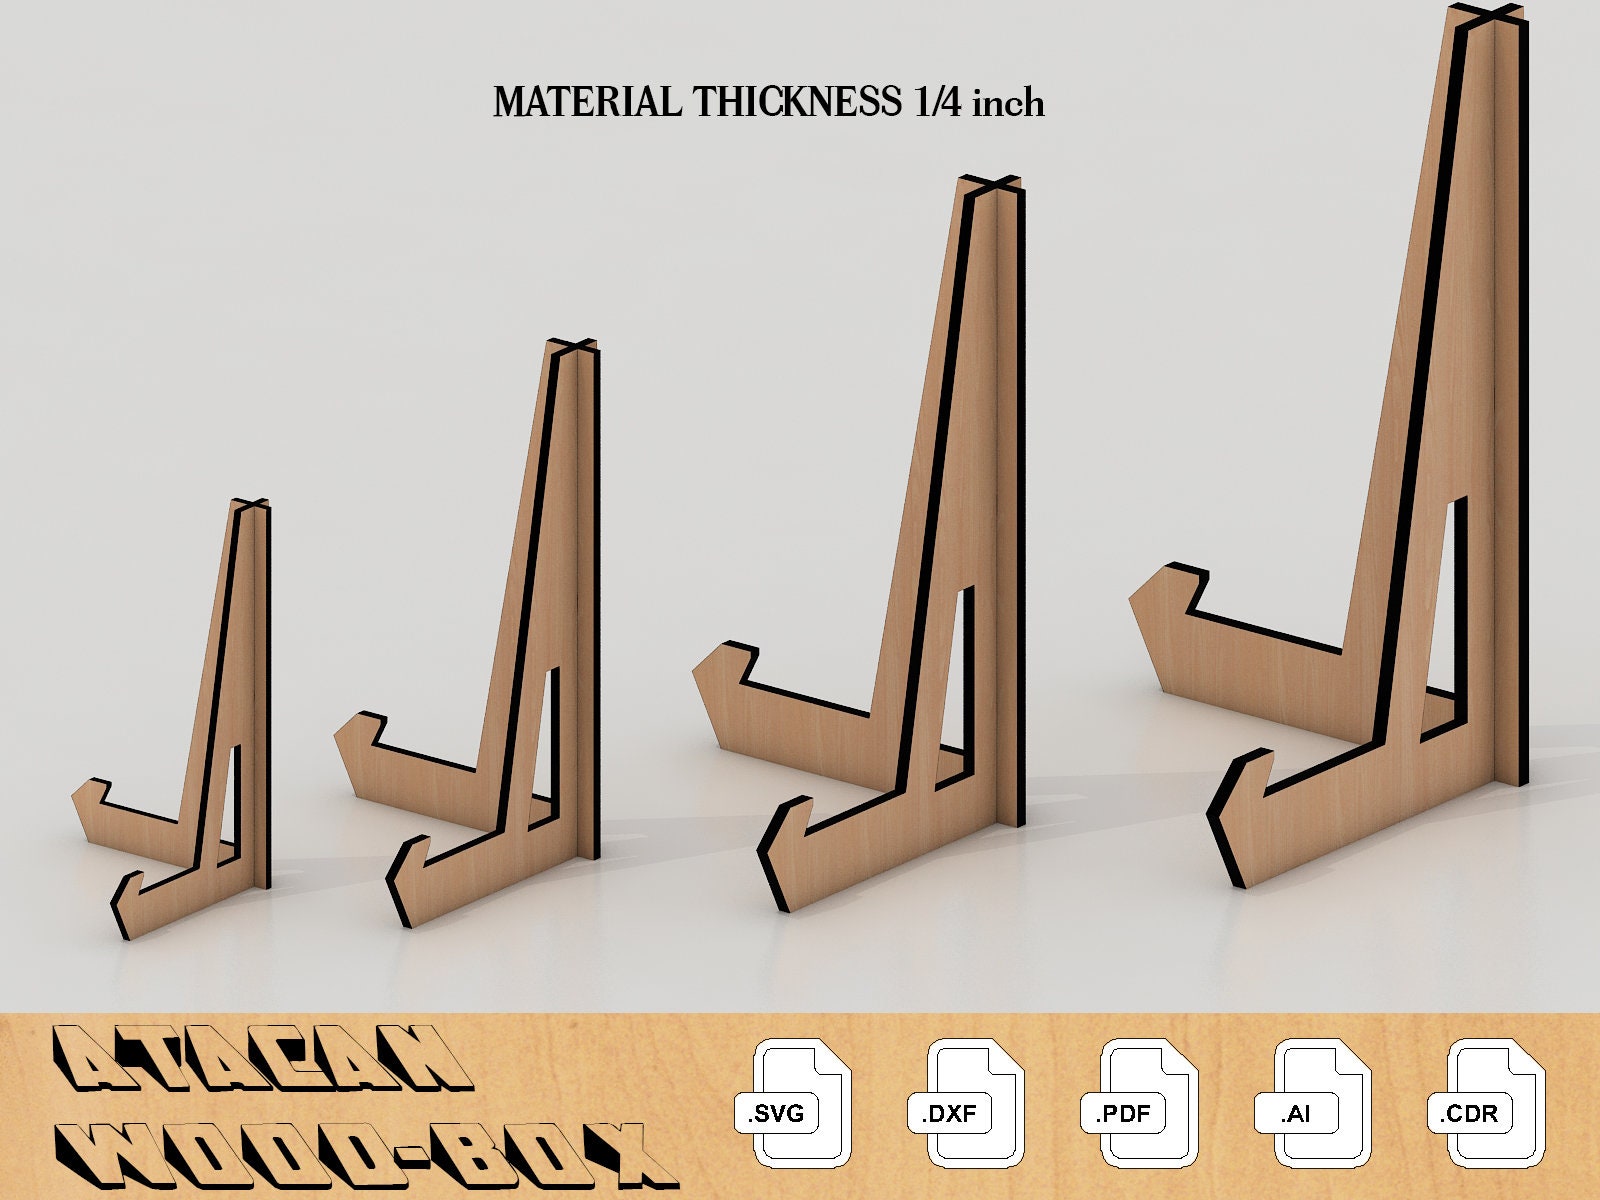 Four easels/display stands in one woodworking plans package.